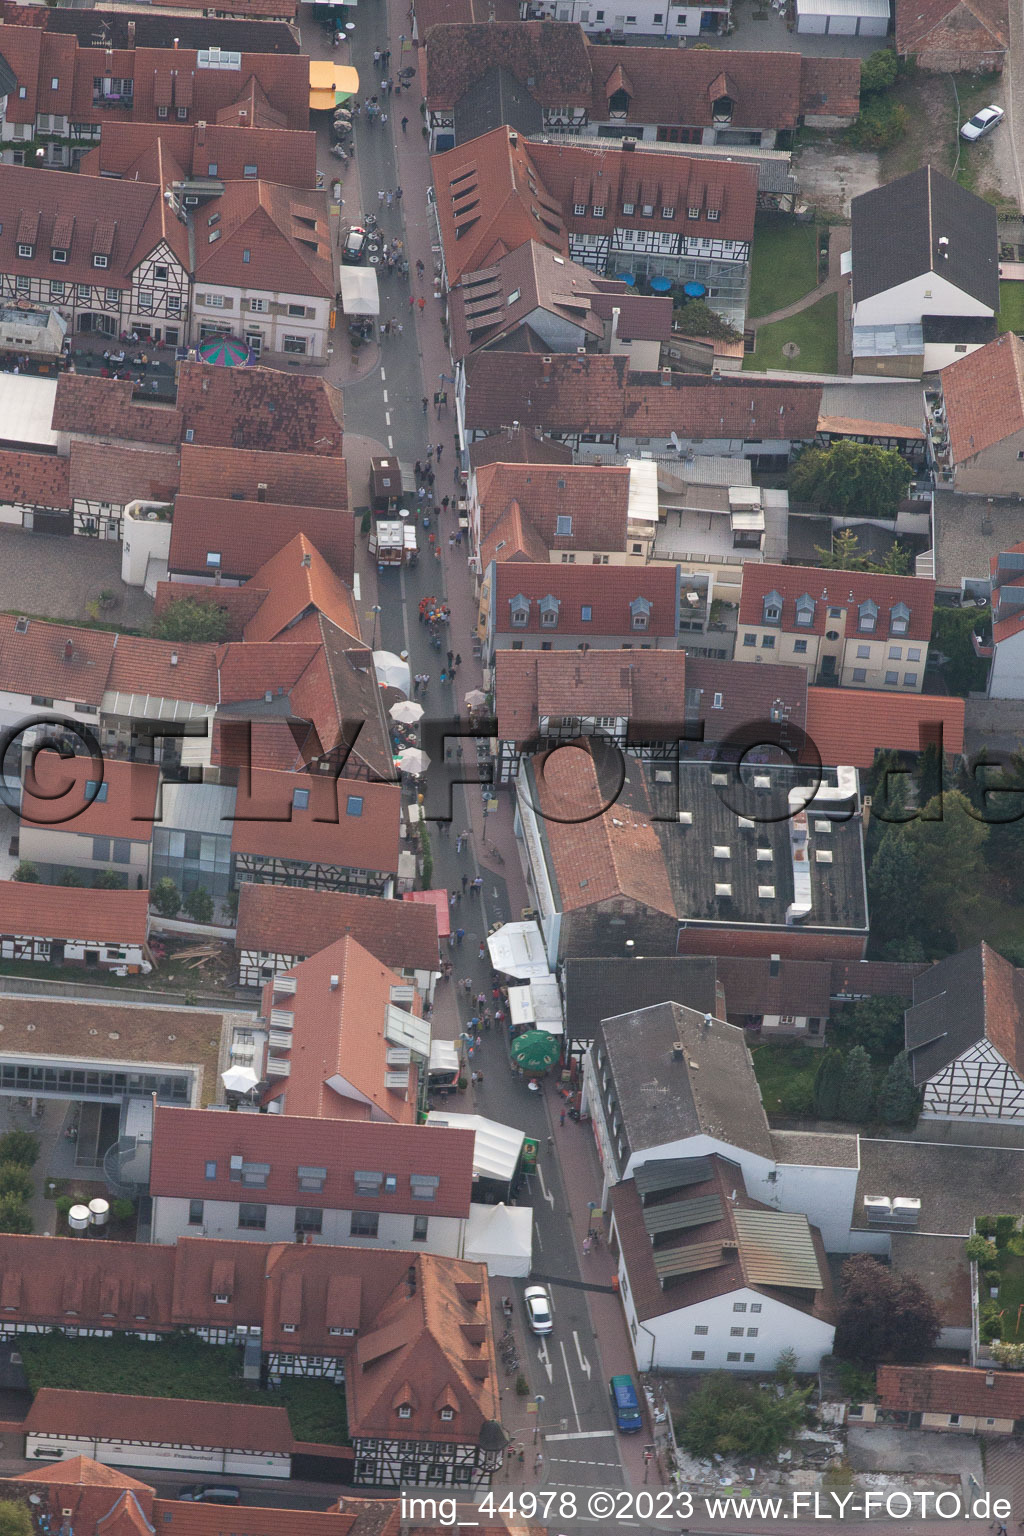 Aerial photograpy of City festival 2011 in Kandel in the state Rhineland-Palatinate, Germany